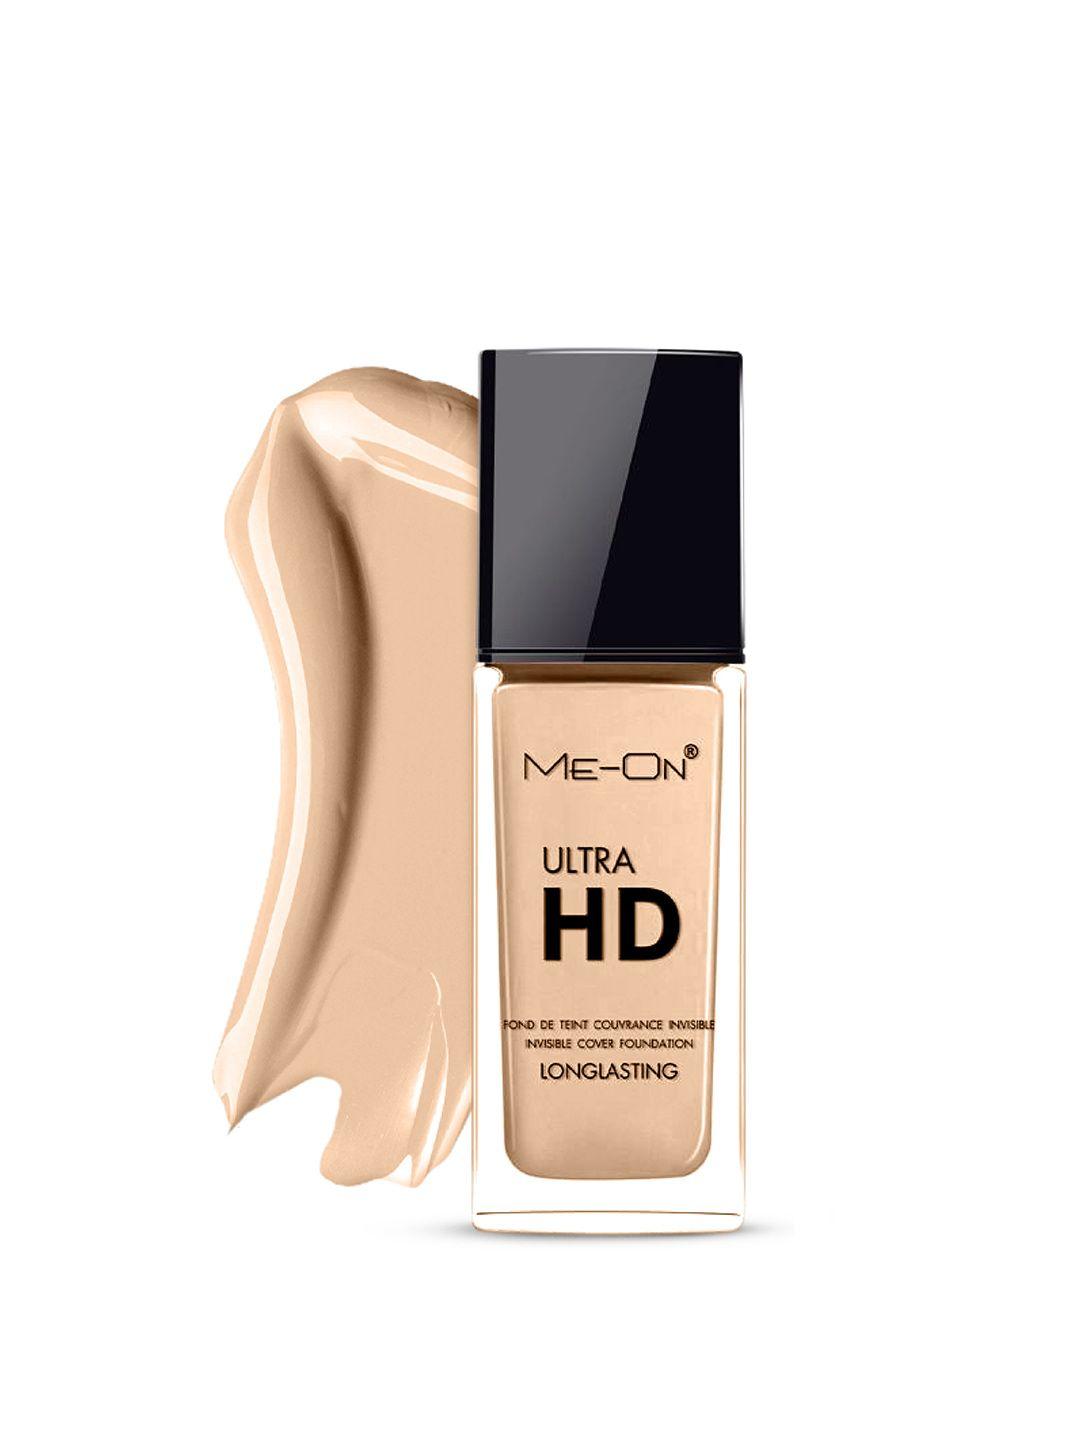 me-on ultra hd long-lasting invisible cover foundation 30ml - natural beige 21